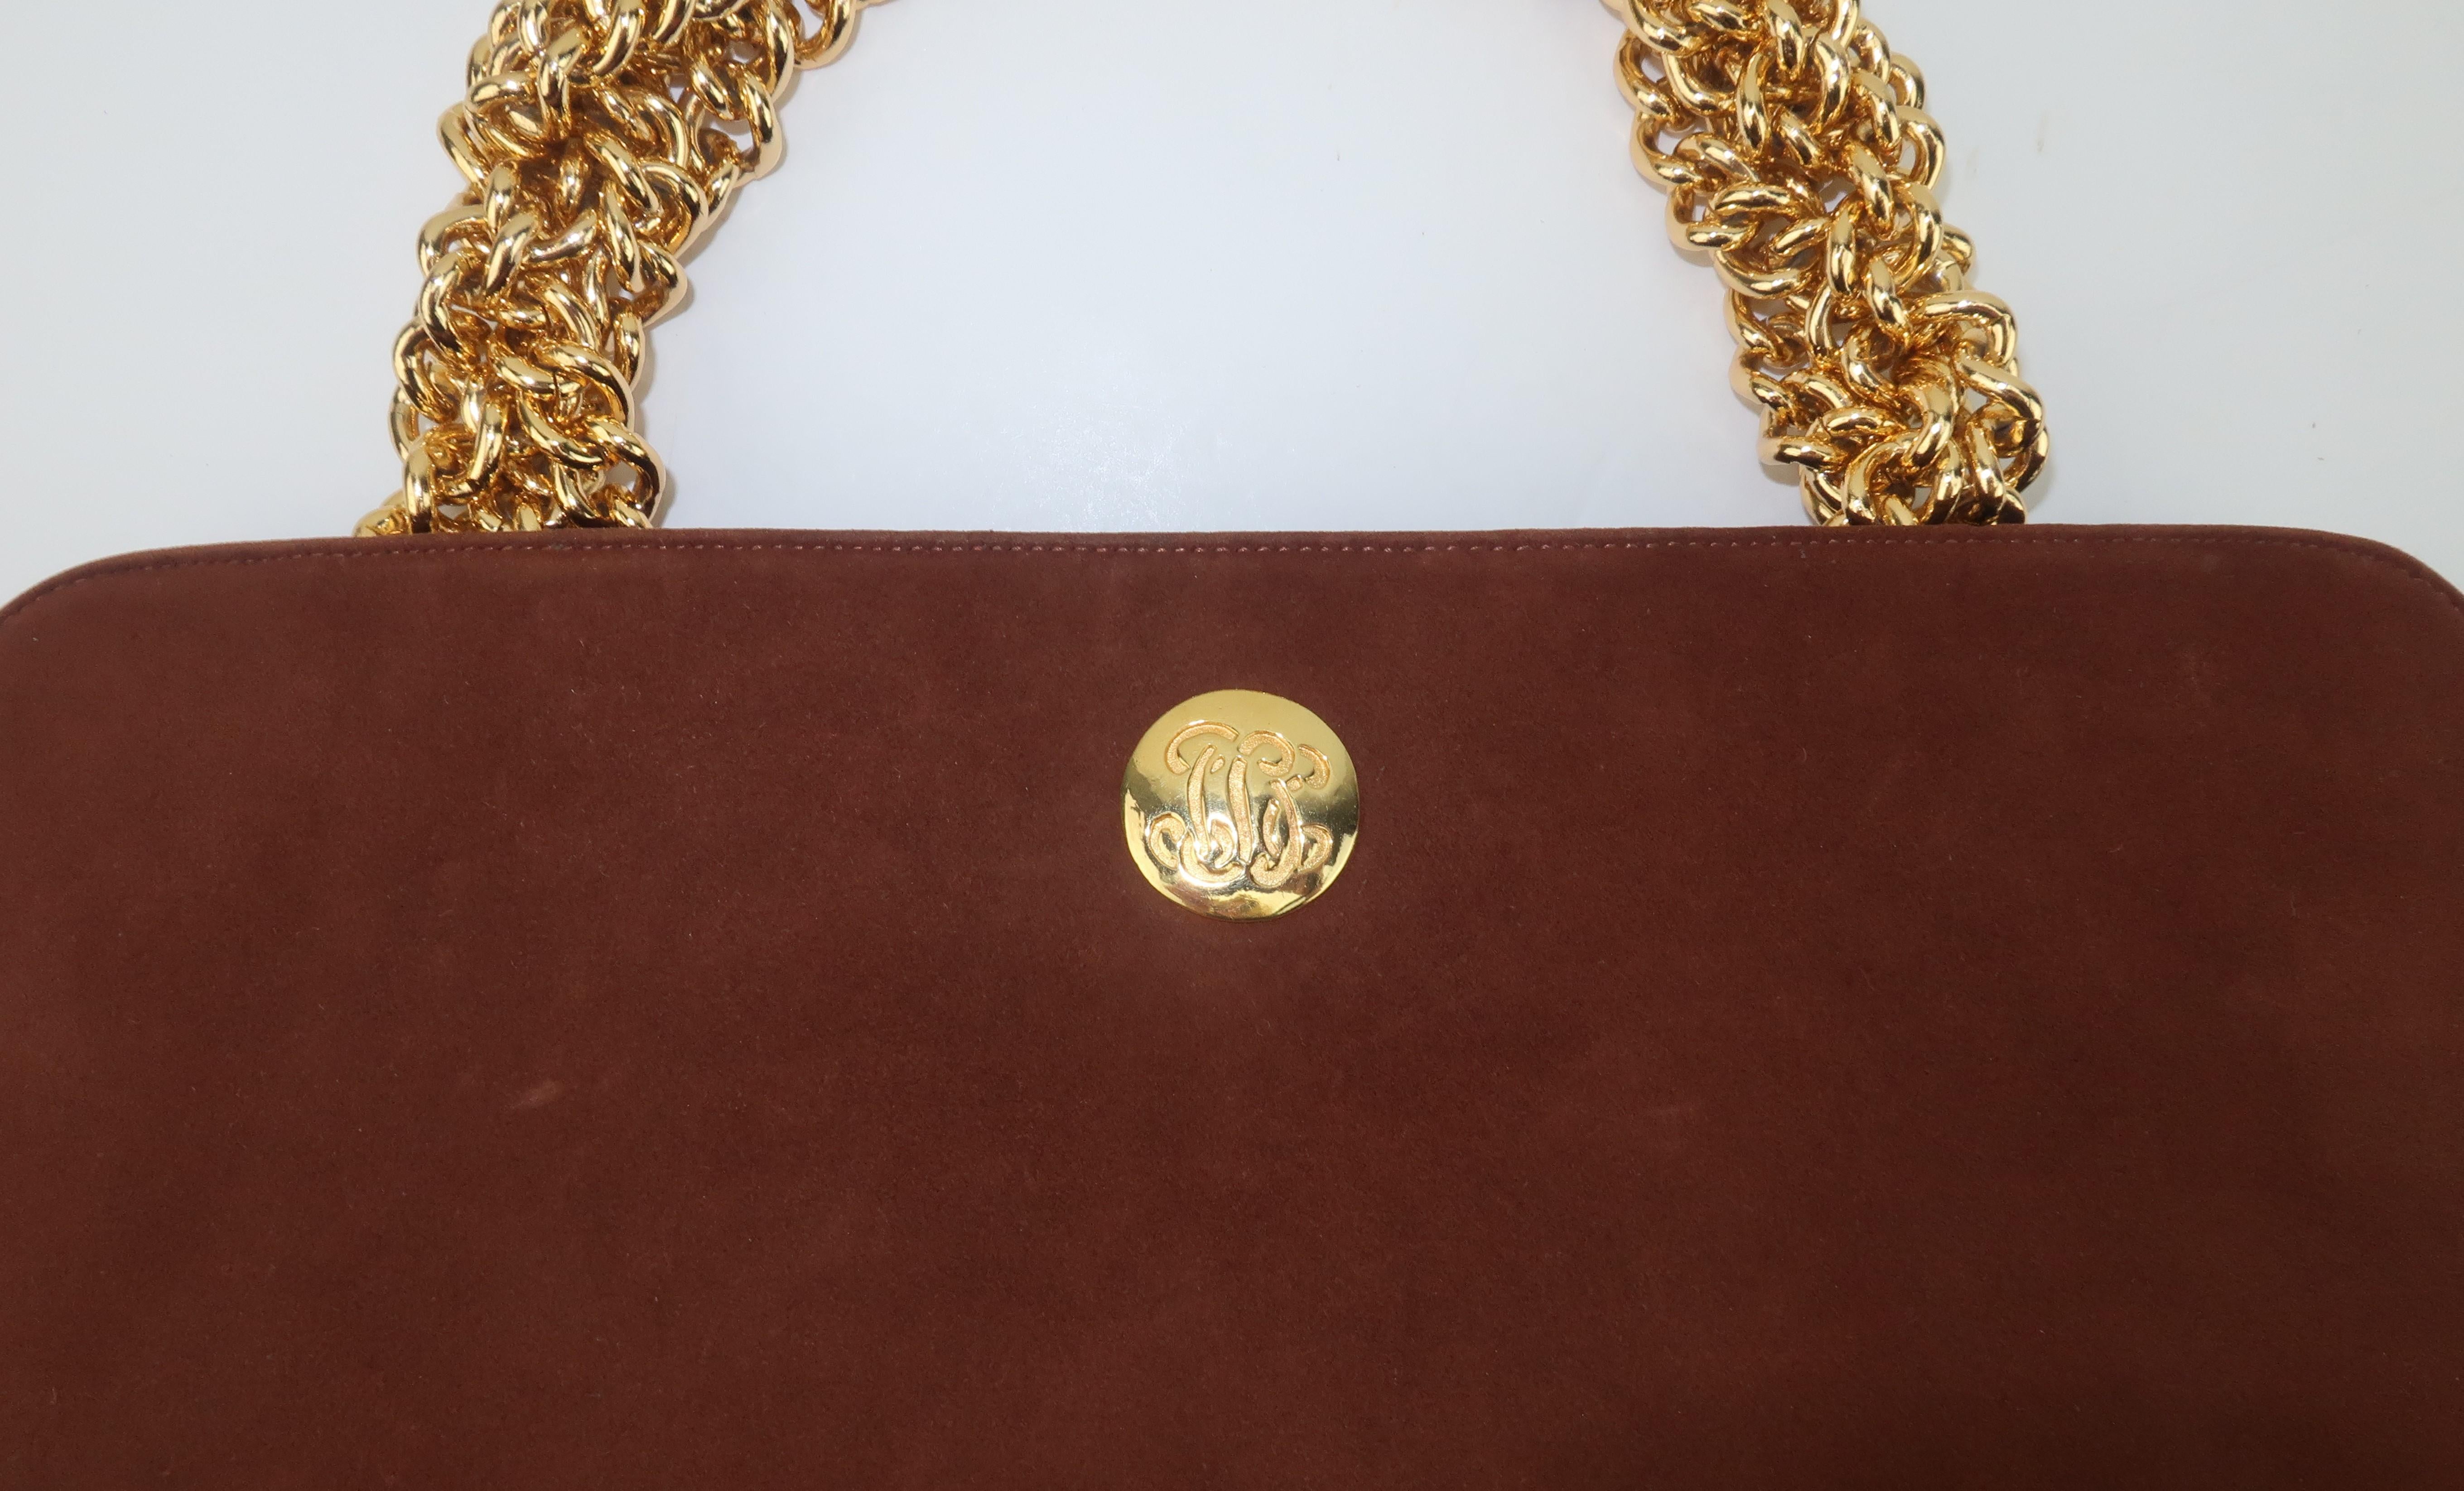 handbags with gold chain handles